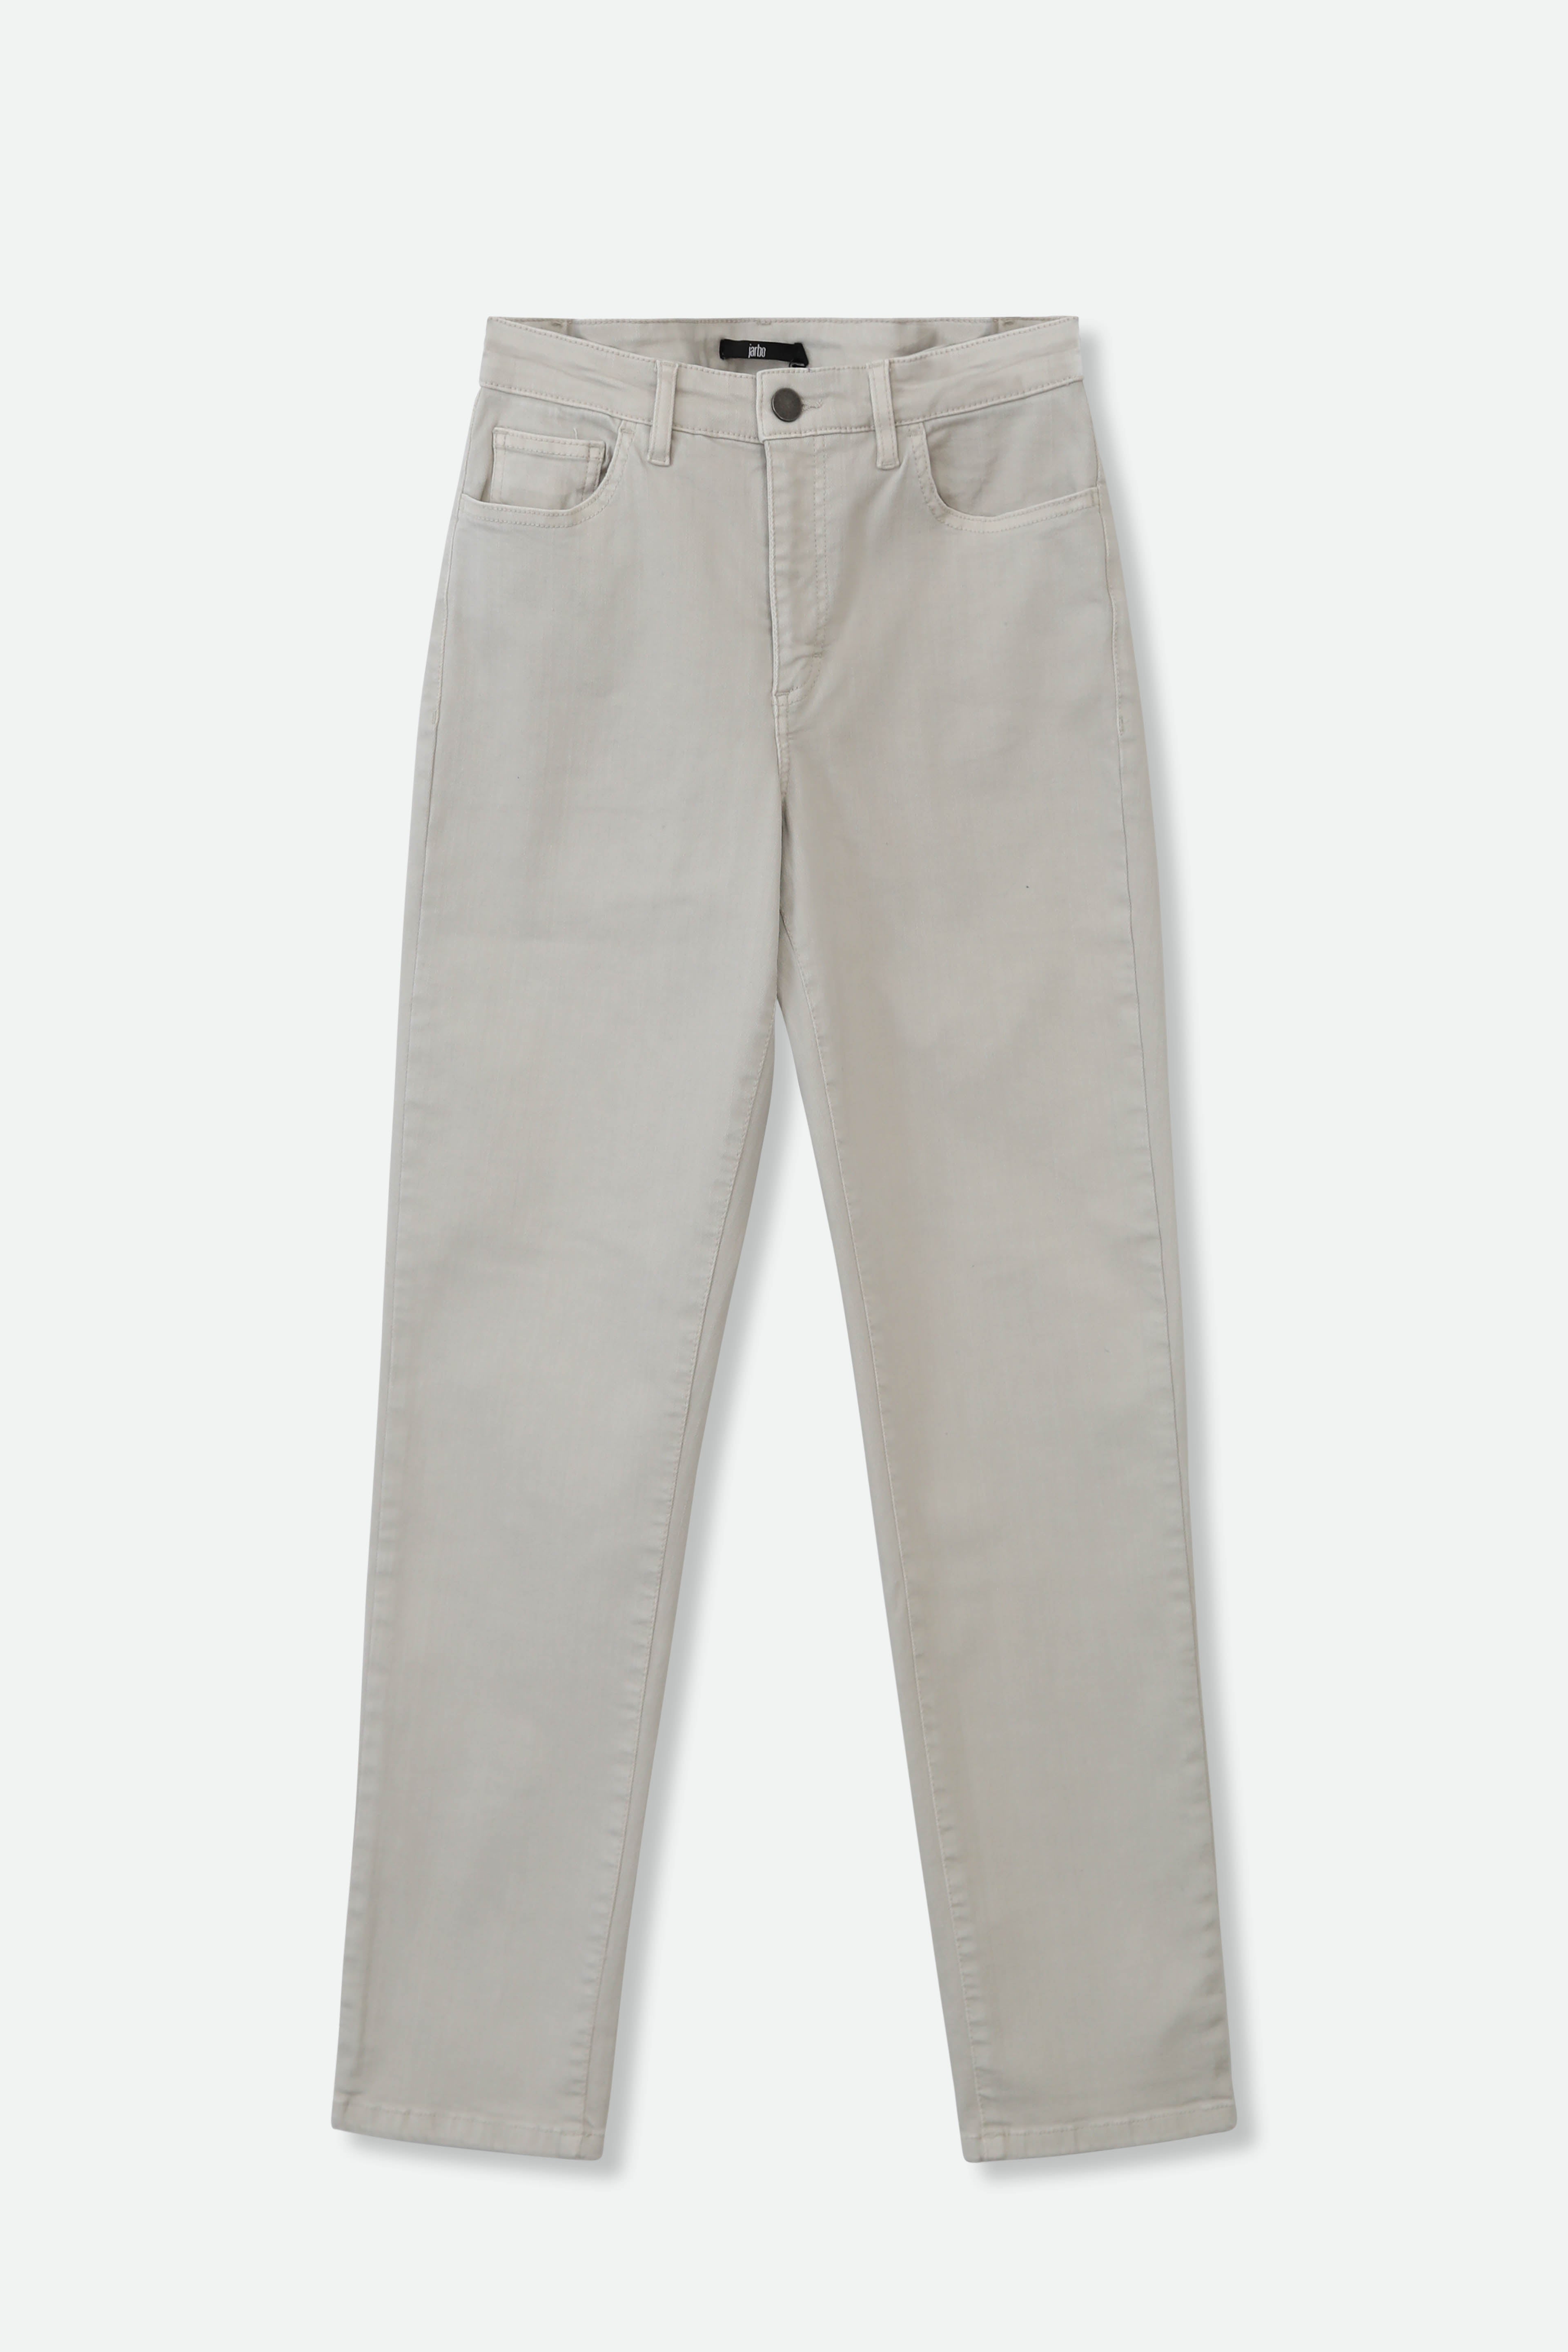 FIVE POCKET CROPPED DENIM PACE PANT IN SAND - Jarbo